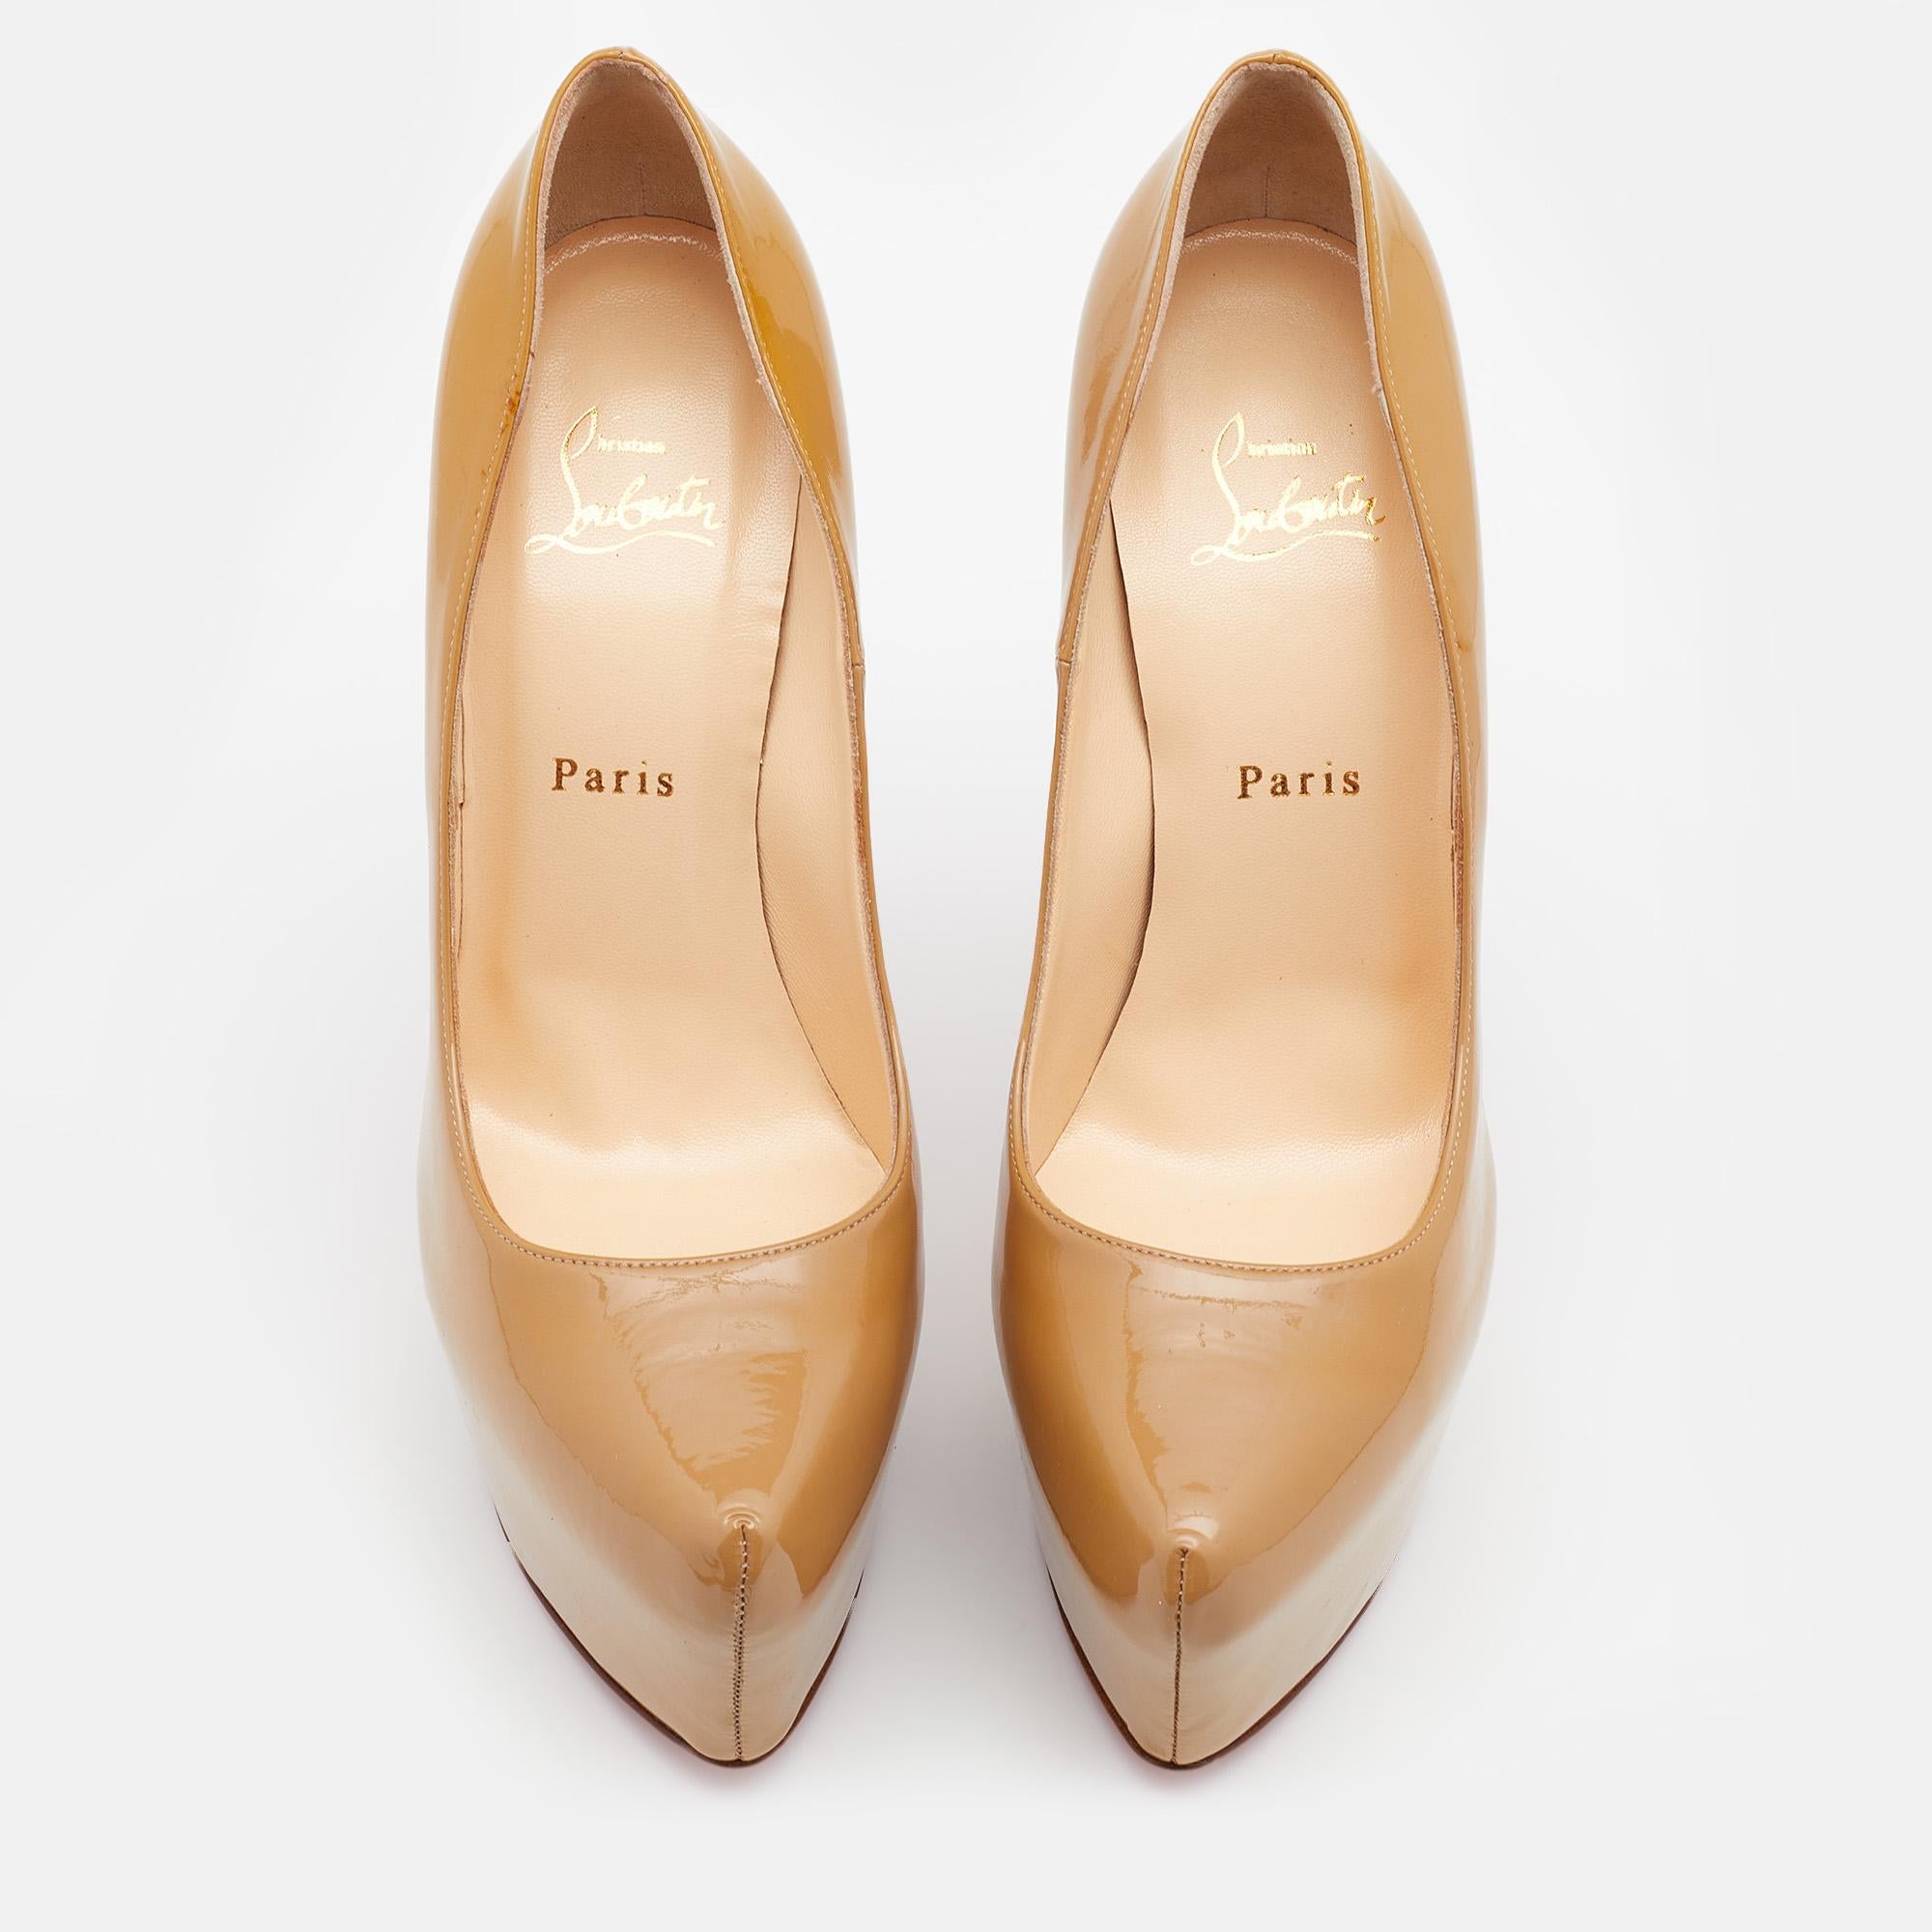 These gorgeous platform pumps from Christian Louboutin epitomize the concept of high fashion. They are crafted from beige patent leather and designed with chunky platforms. They are equipped with comfortable leather-lined insoles and are elevated on